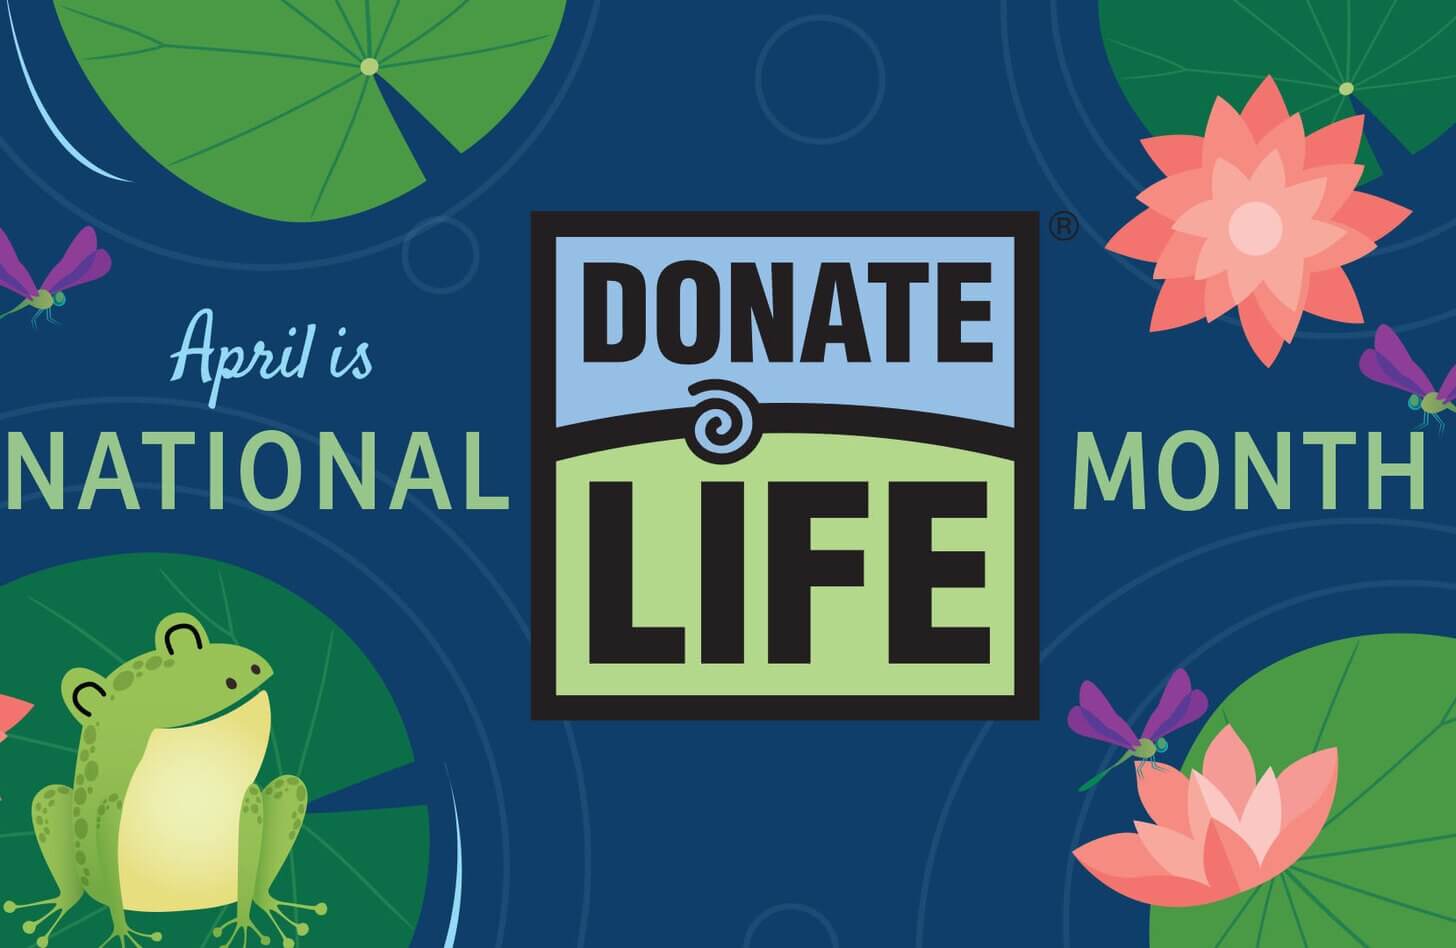 TEXT "April is National Donate Life Month" set against a background of a pond with frogs and lily pads